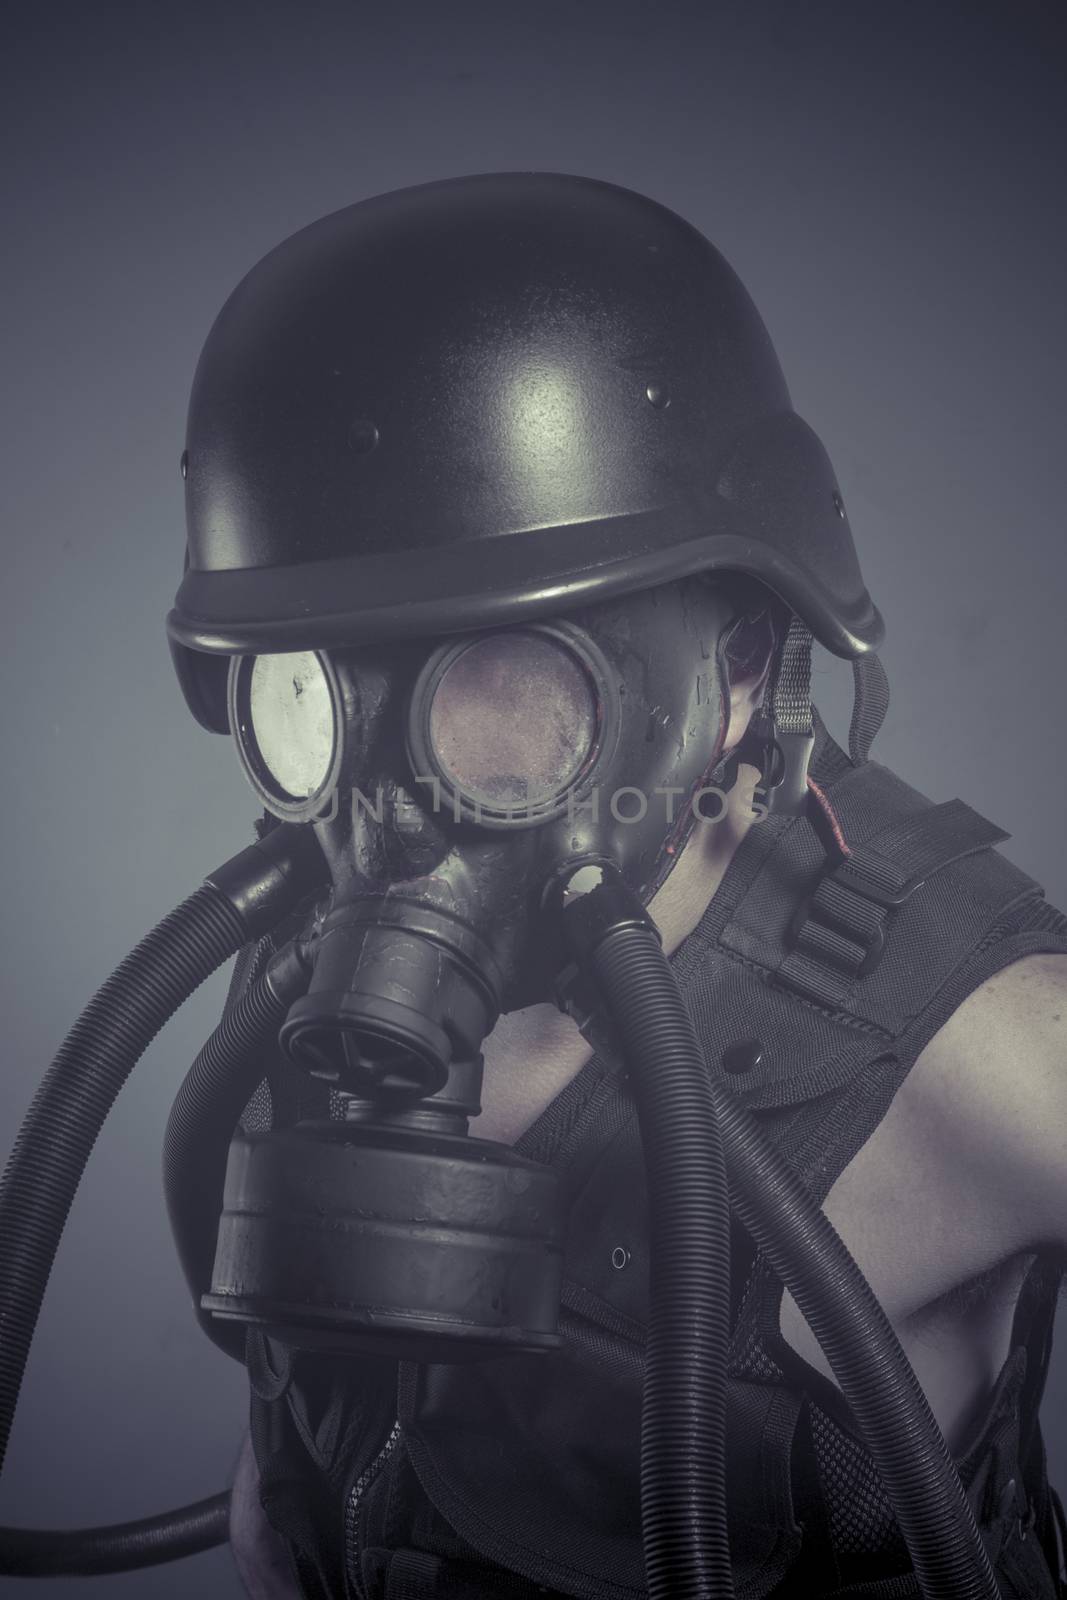 Inhalation, Man with black gas mask, pollution concept and ecological disaster